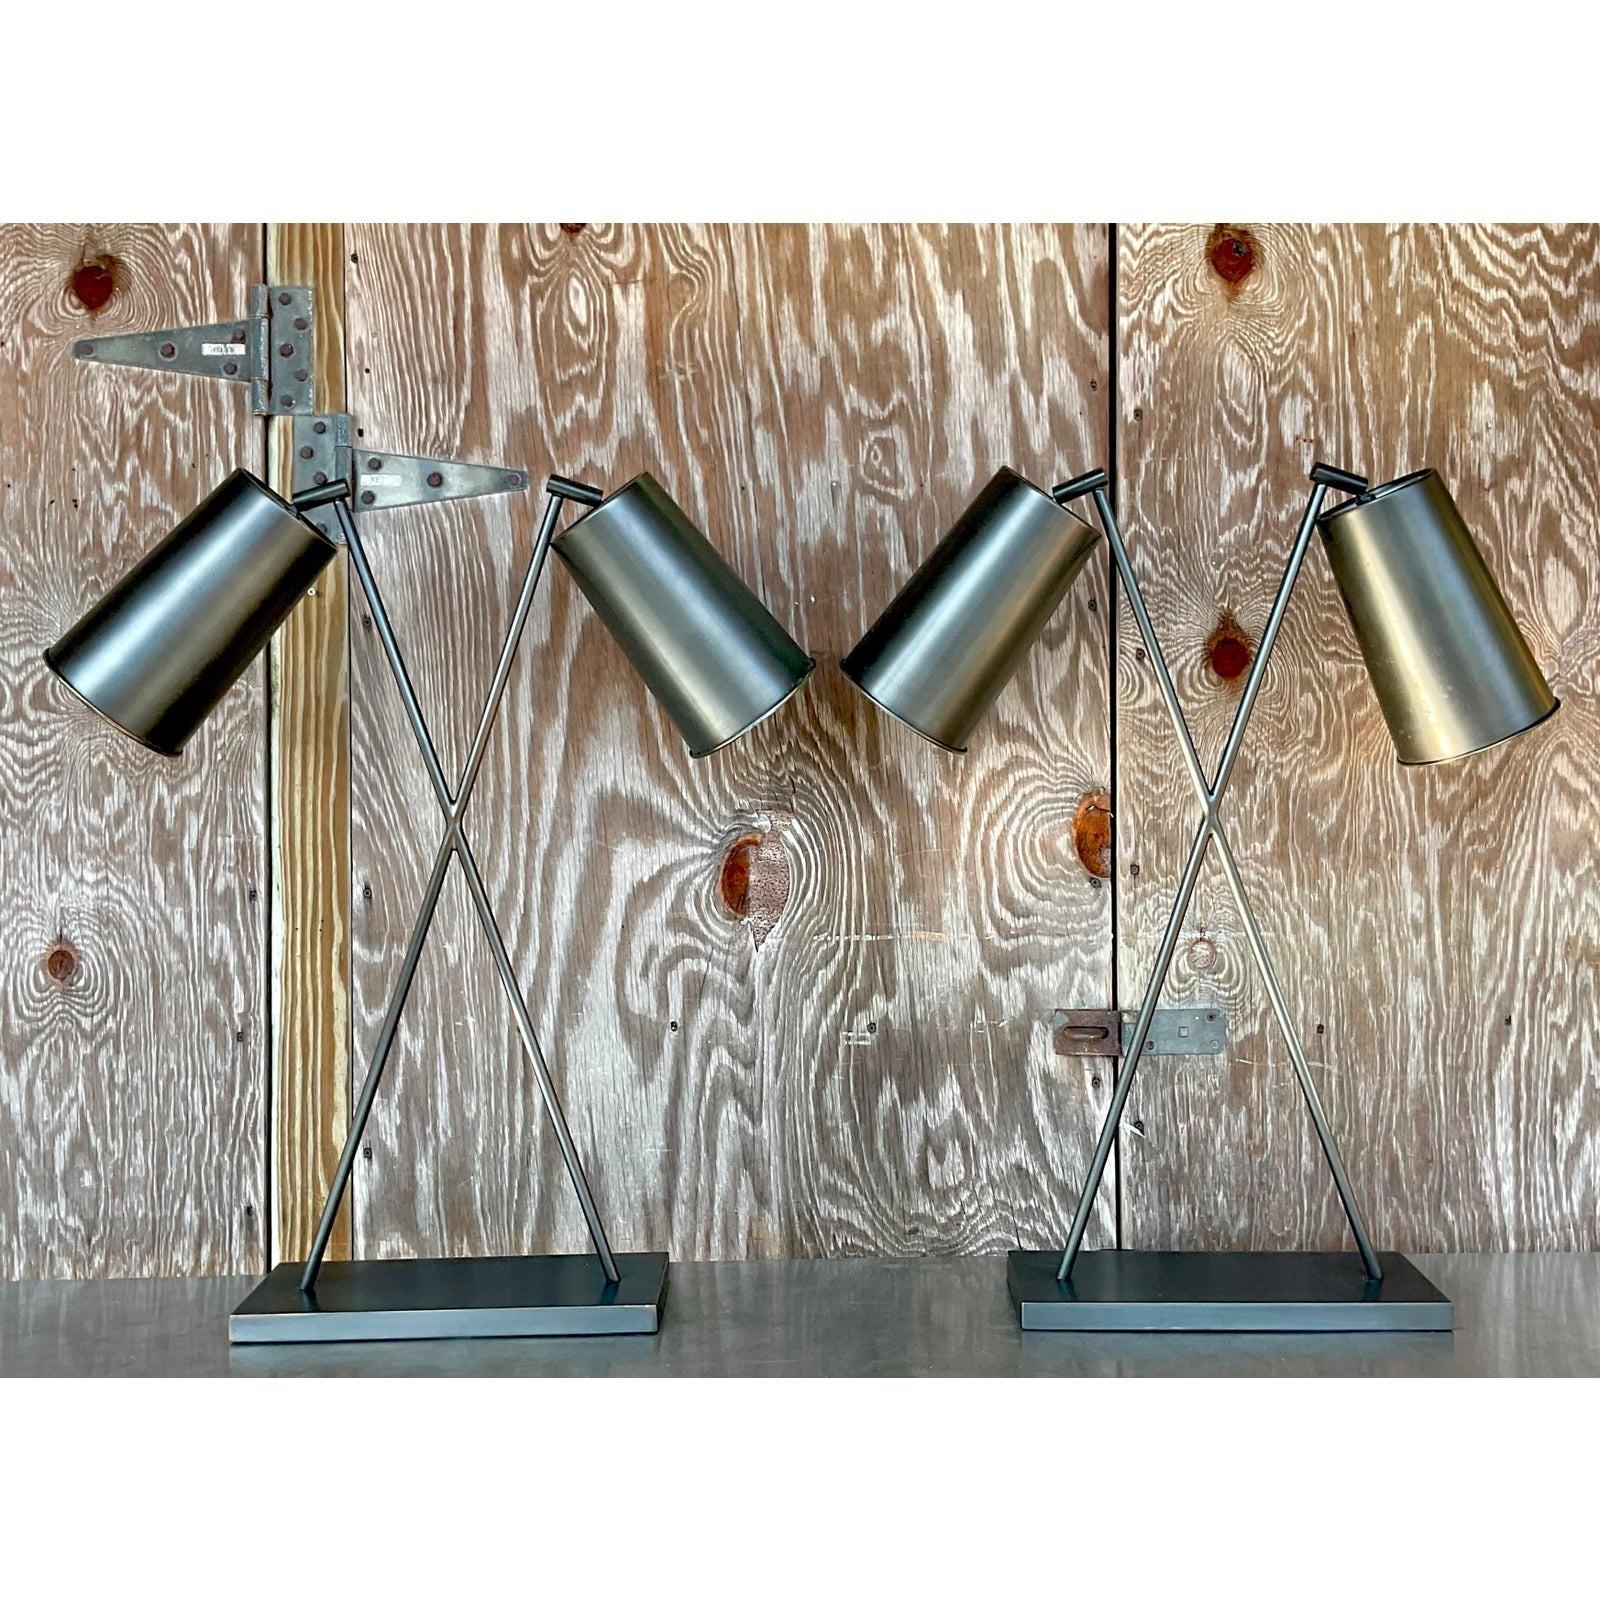 A fabulous pair of vintage Boho table lamps. The chic “Marley” design my by thr Arteriors group. Beautiful articulated shades on a fab x design. Large and impressive. Acquired from a palm Beach estate.